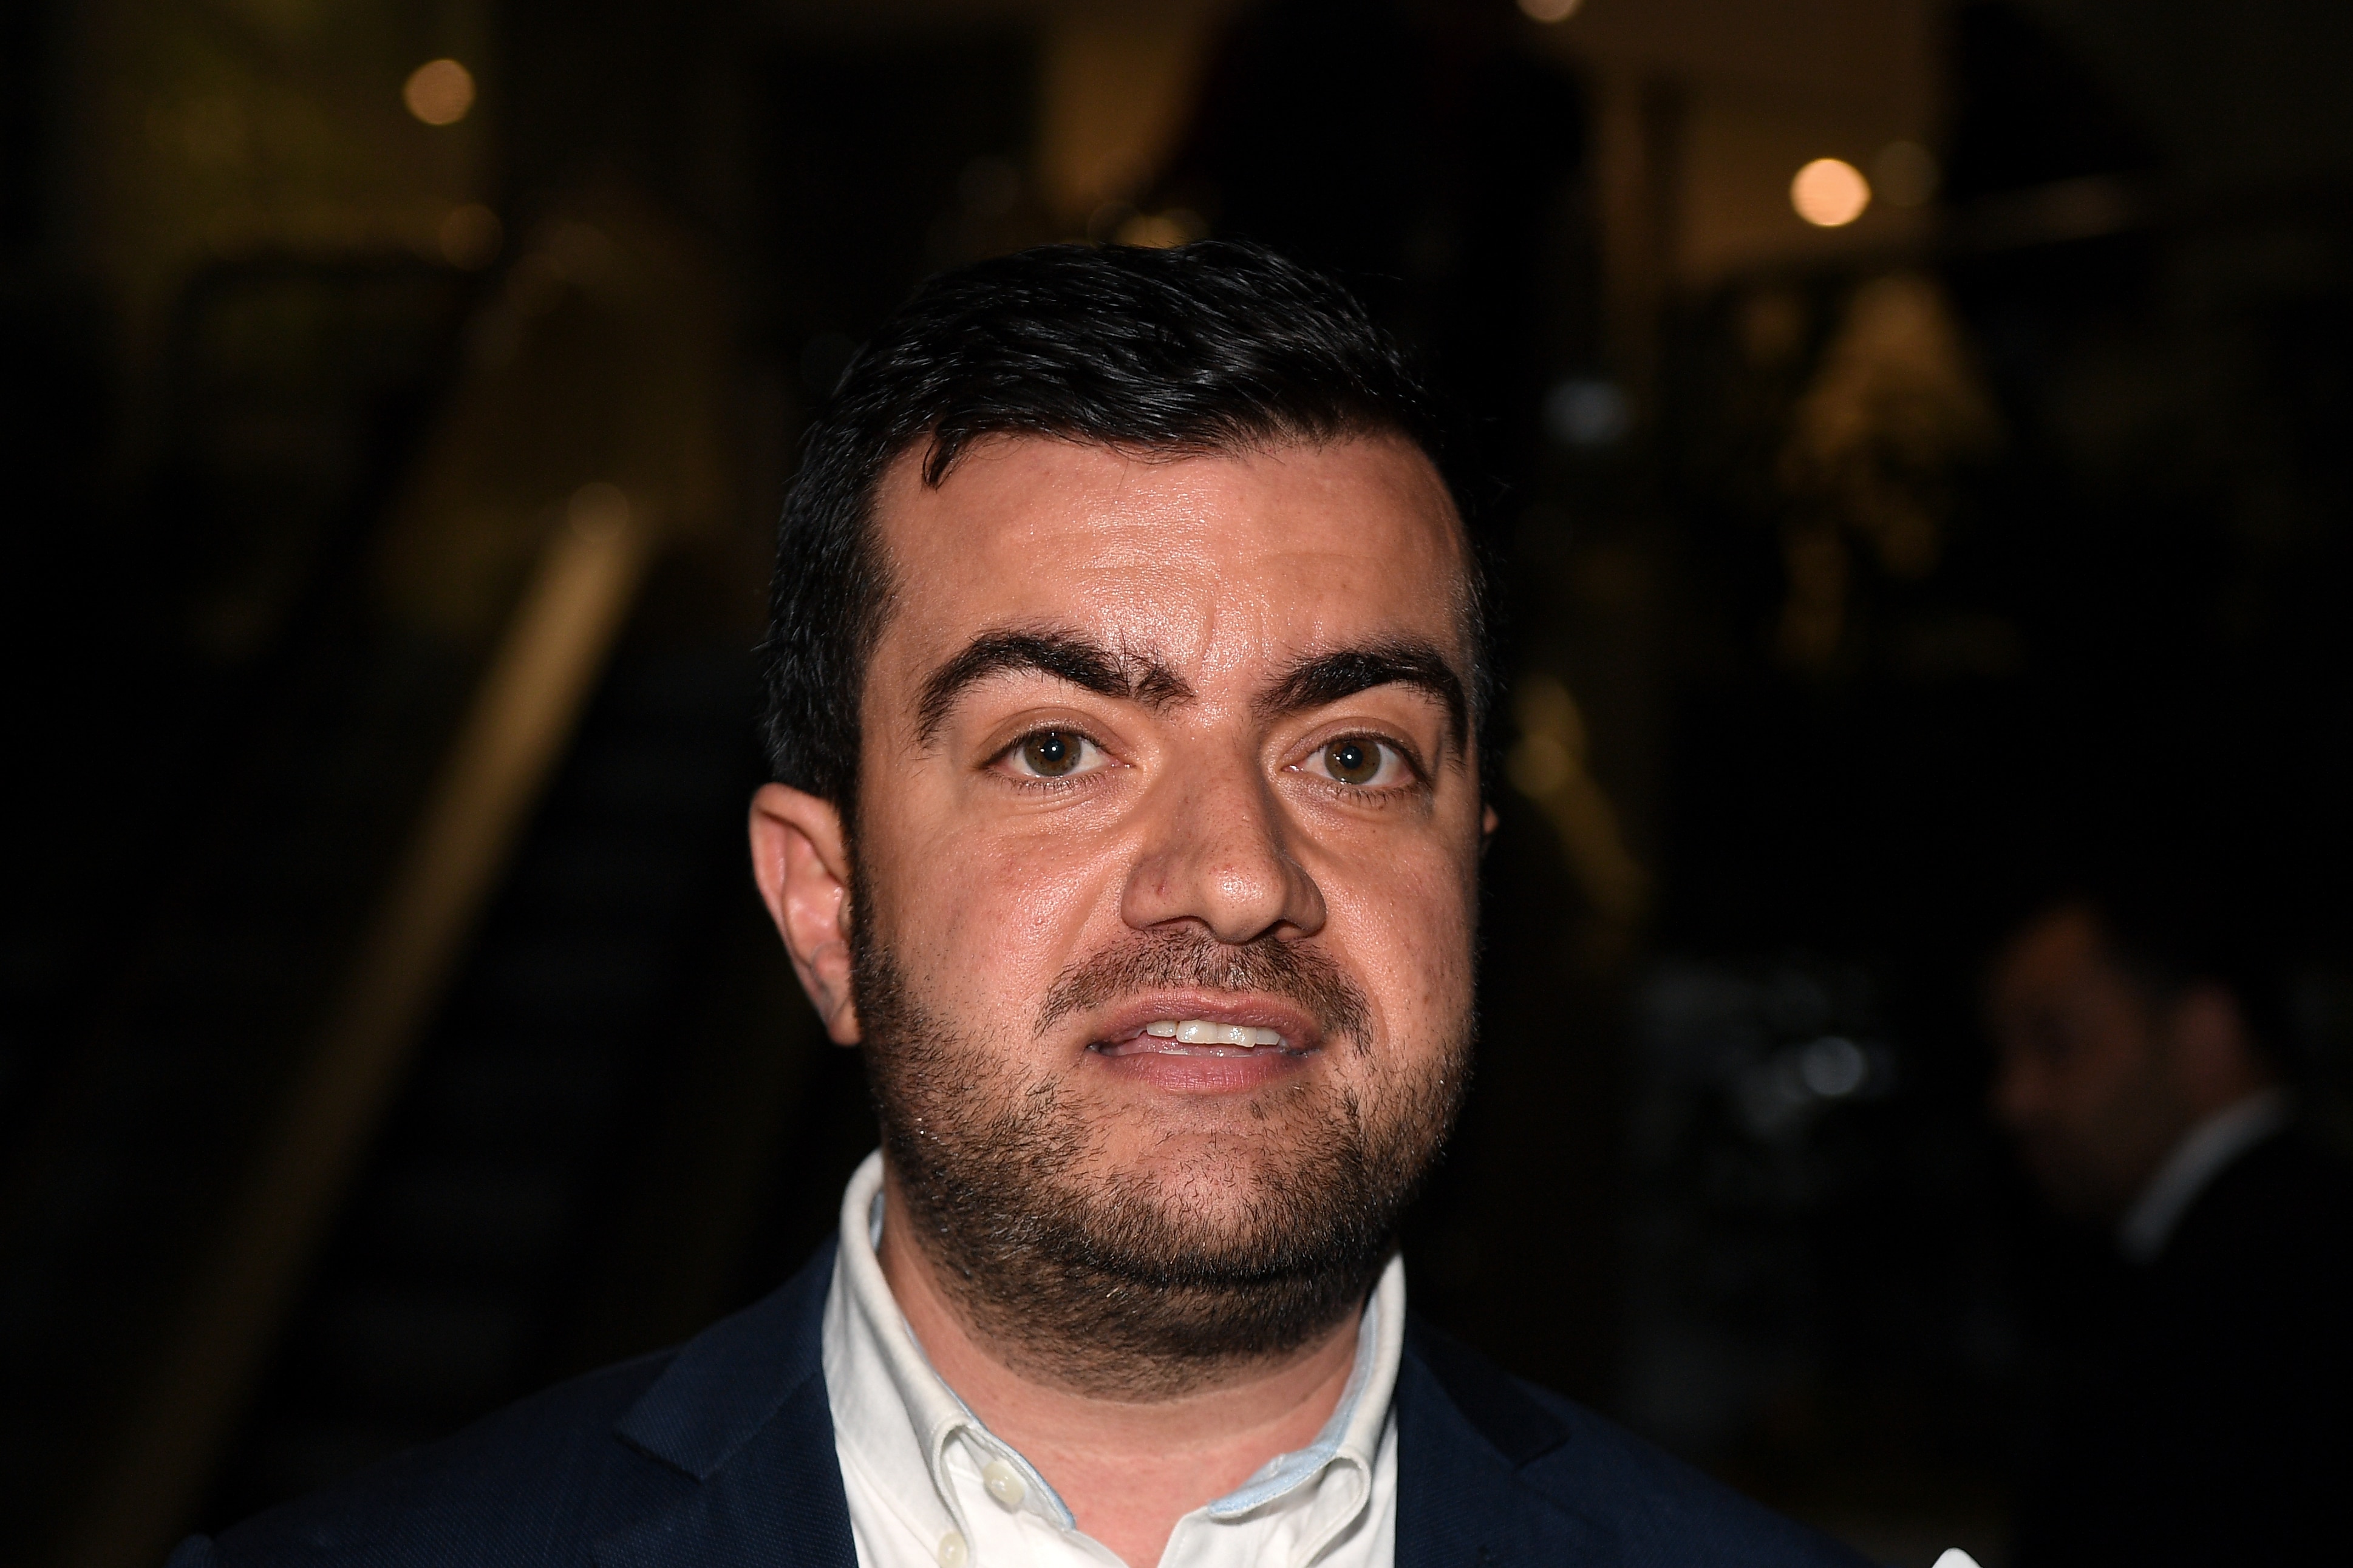 Former Federal Labor Senator Sam Dastyari was named in the text messages.